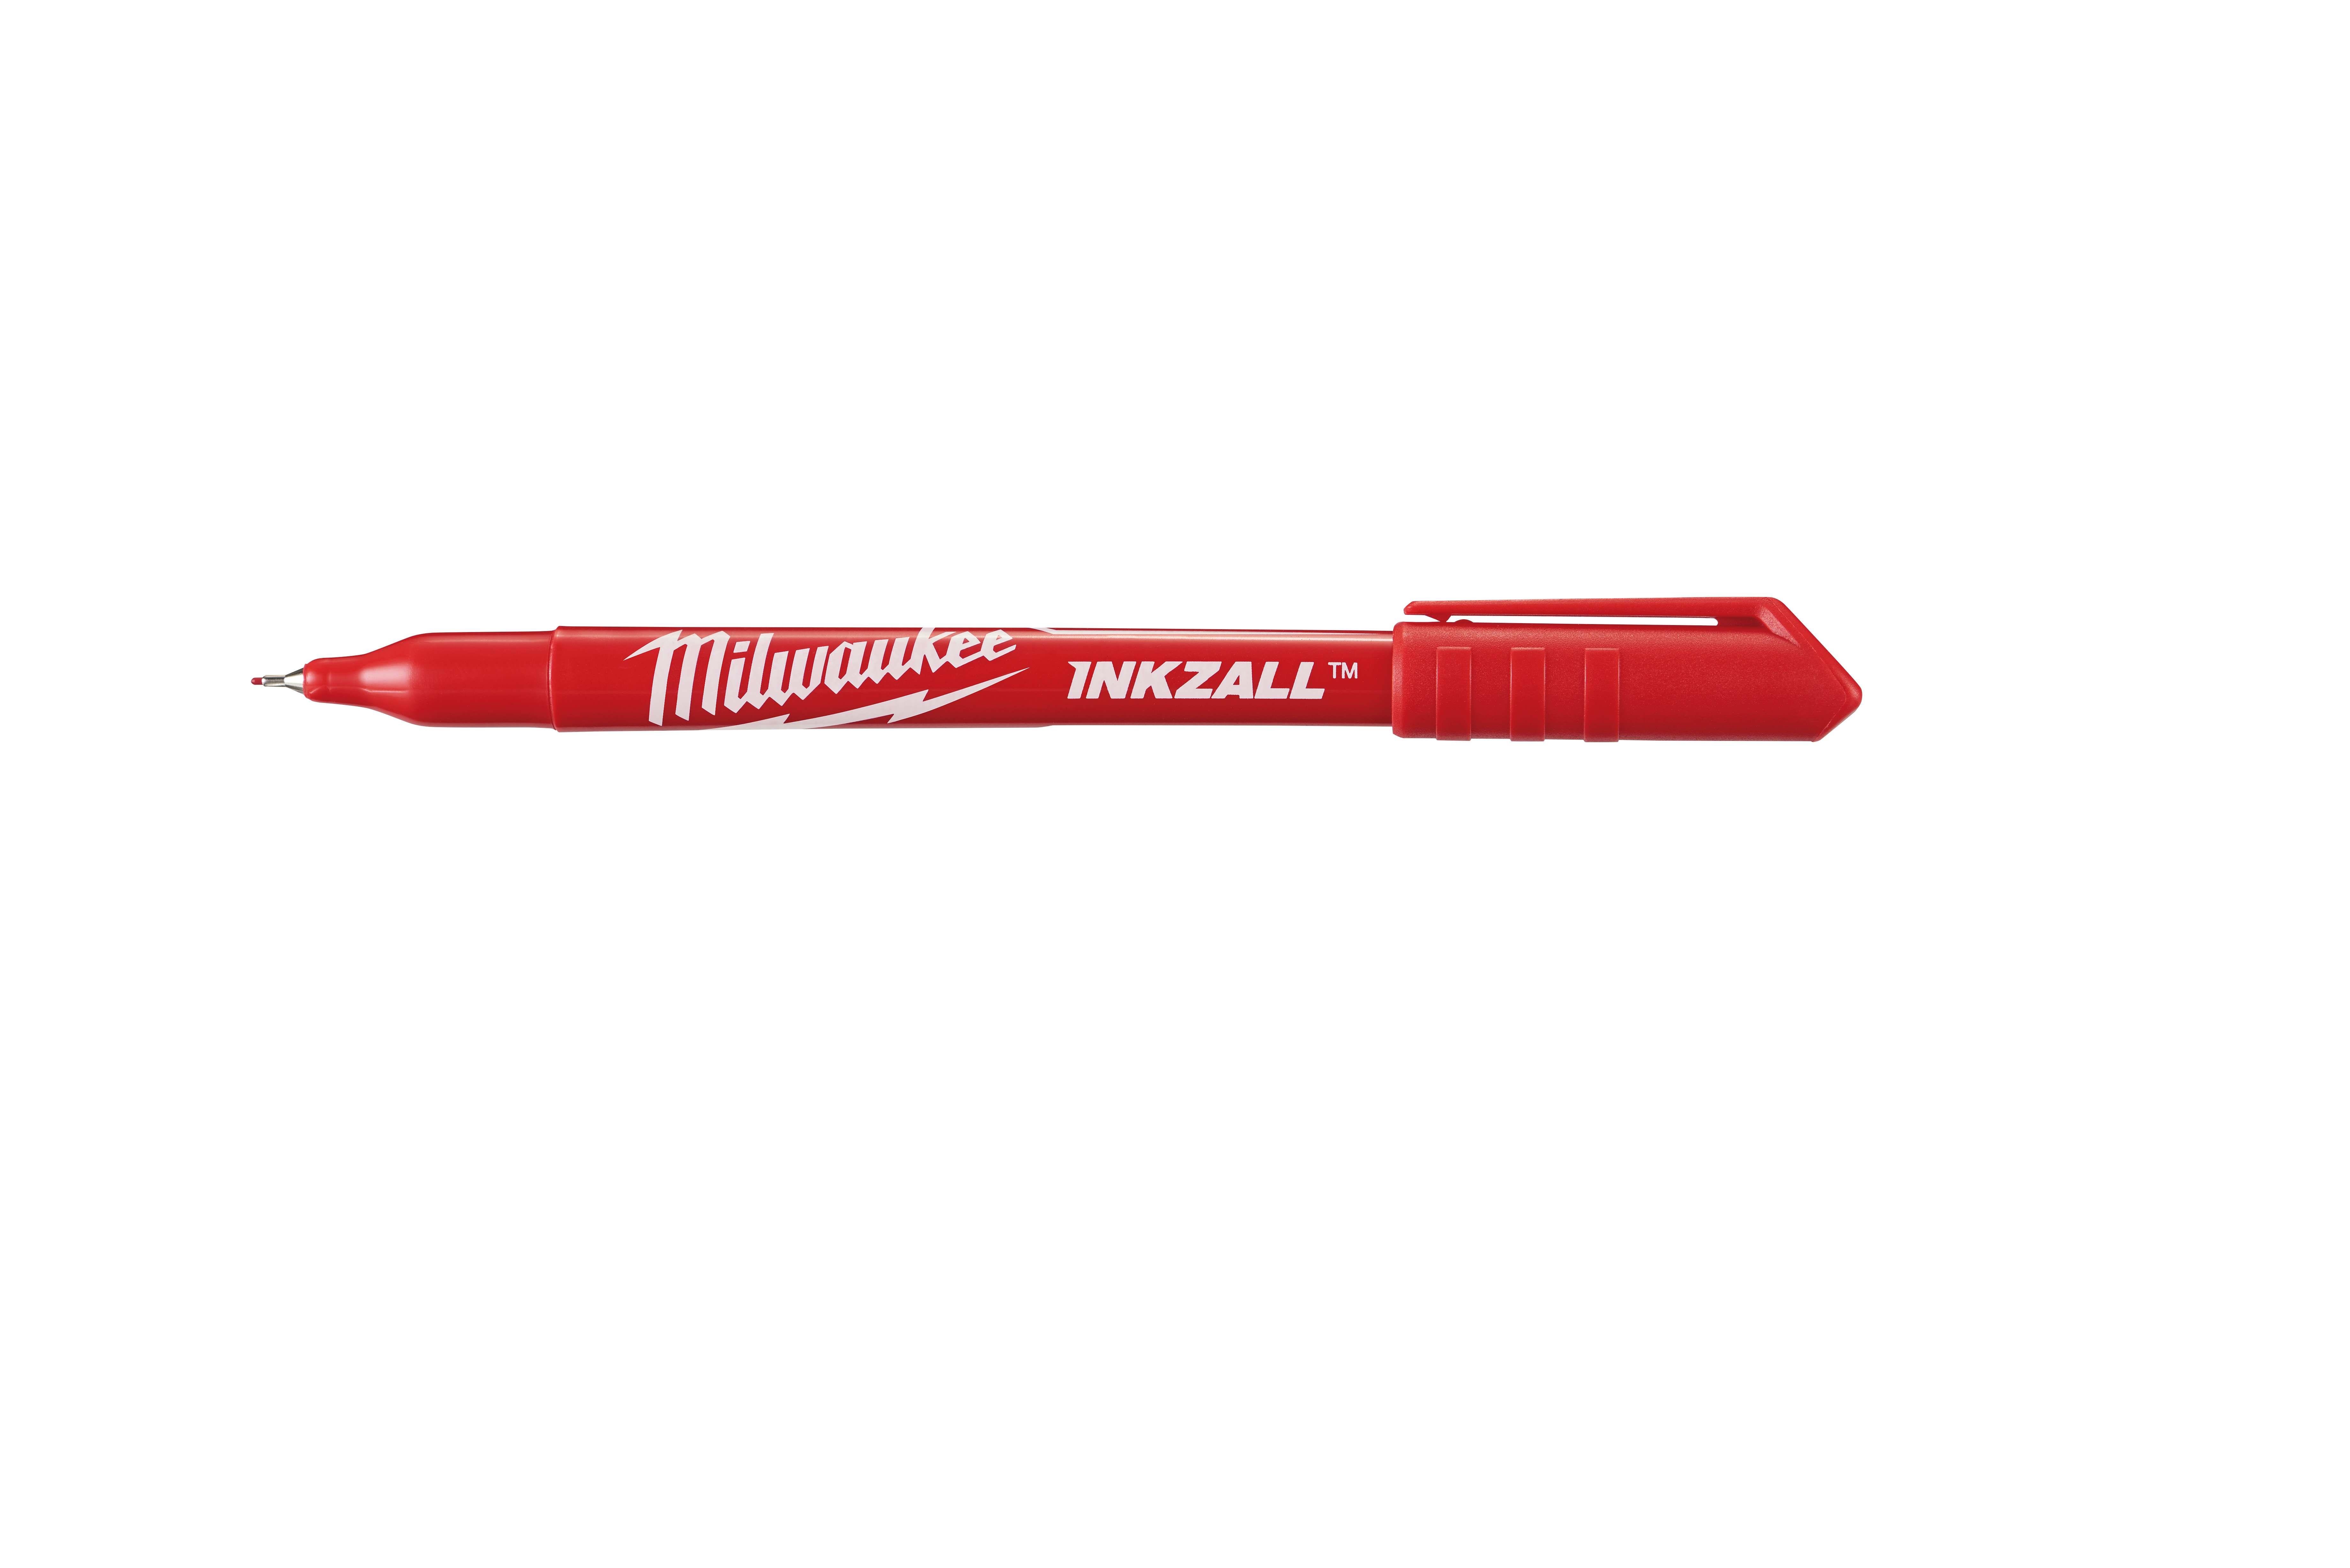 48-22-3161 045242479795 Milwaukee INKZALL™ ultra fine point pens are optimized for jobsite conditions and deliver sharp, precise lines. The durable ultra fine point tip delivers a 0.5 mm line for precise writing and labeling. Bleed resistant ink drys quickly and resists smears. 72 hour cap-off life delivers extended performance and use. An integrated pocket clip enables easy carry and storage.